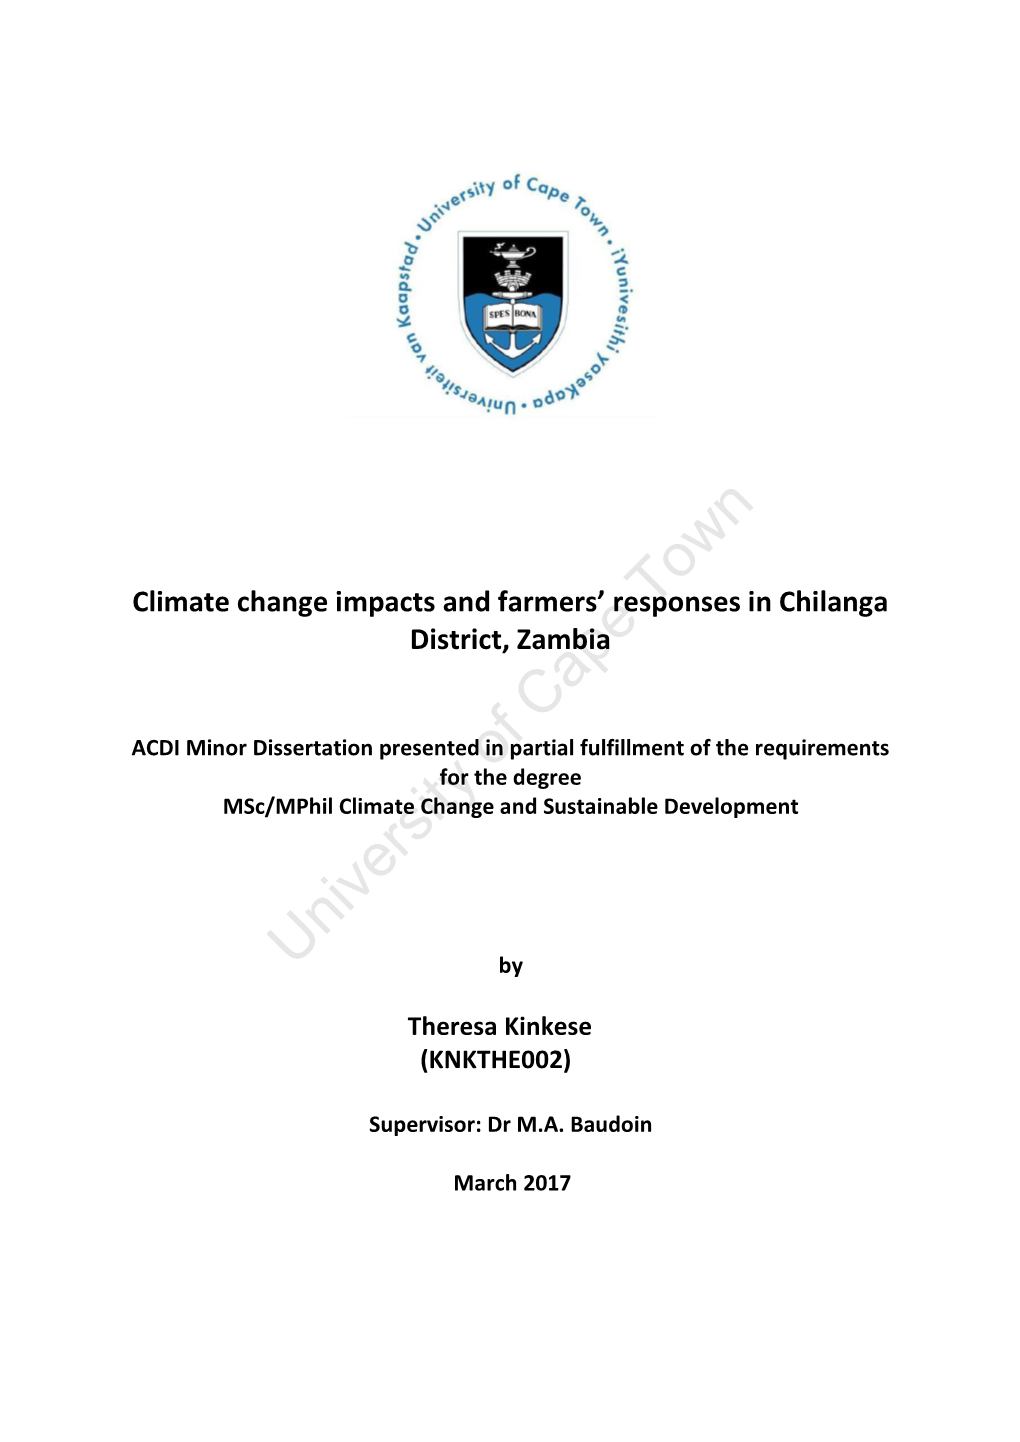 Climate Change Impacts and Farmers' Responses in Chilanga District